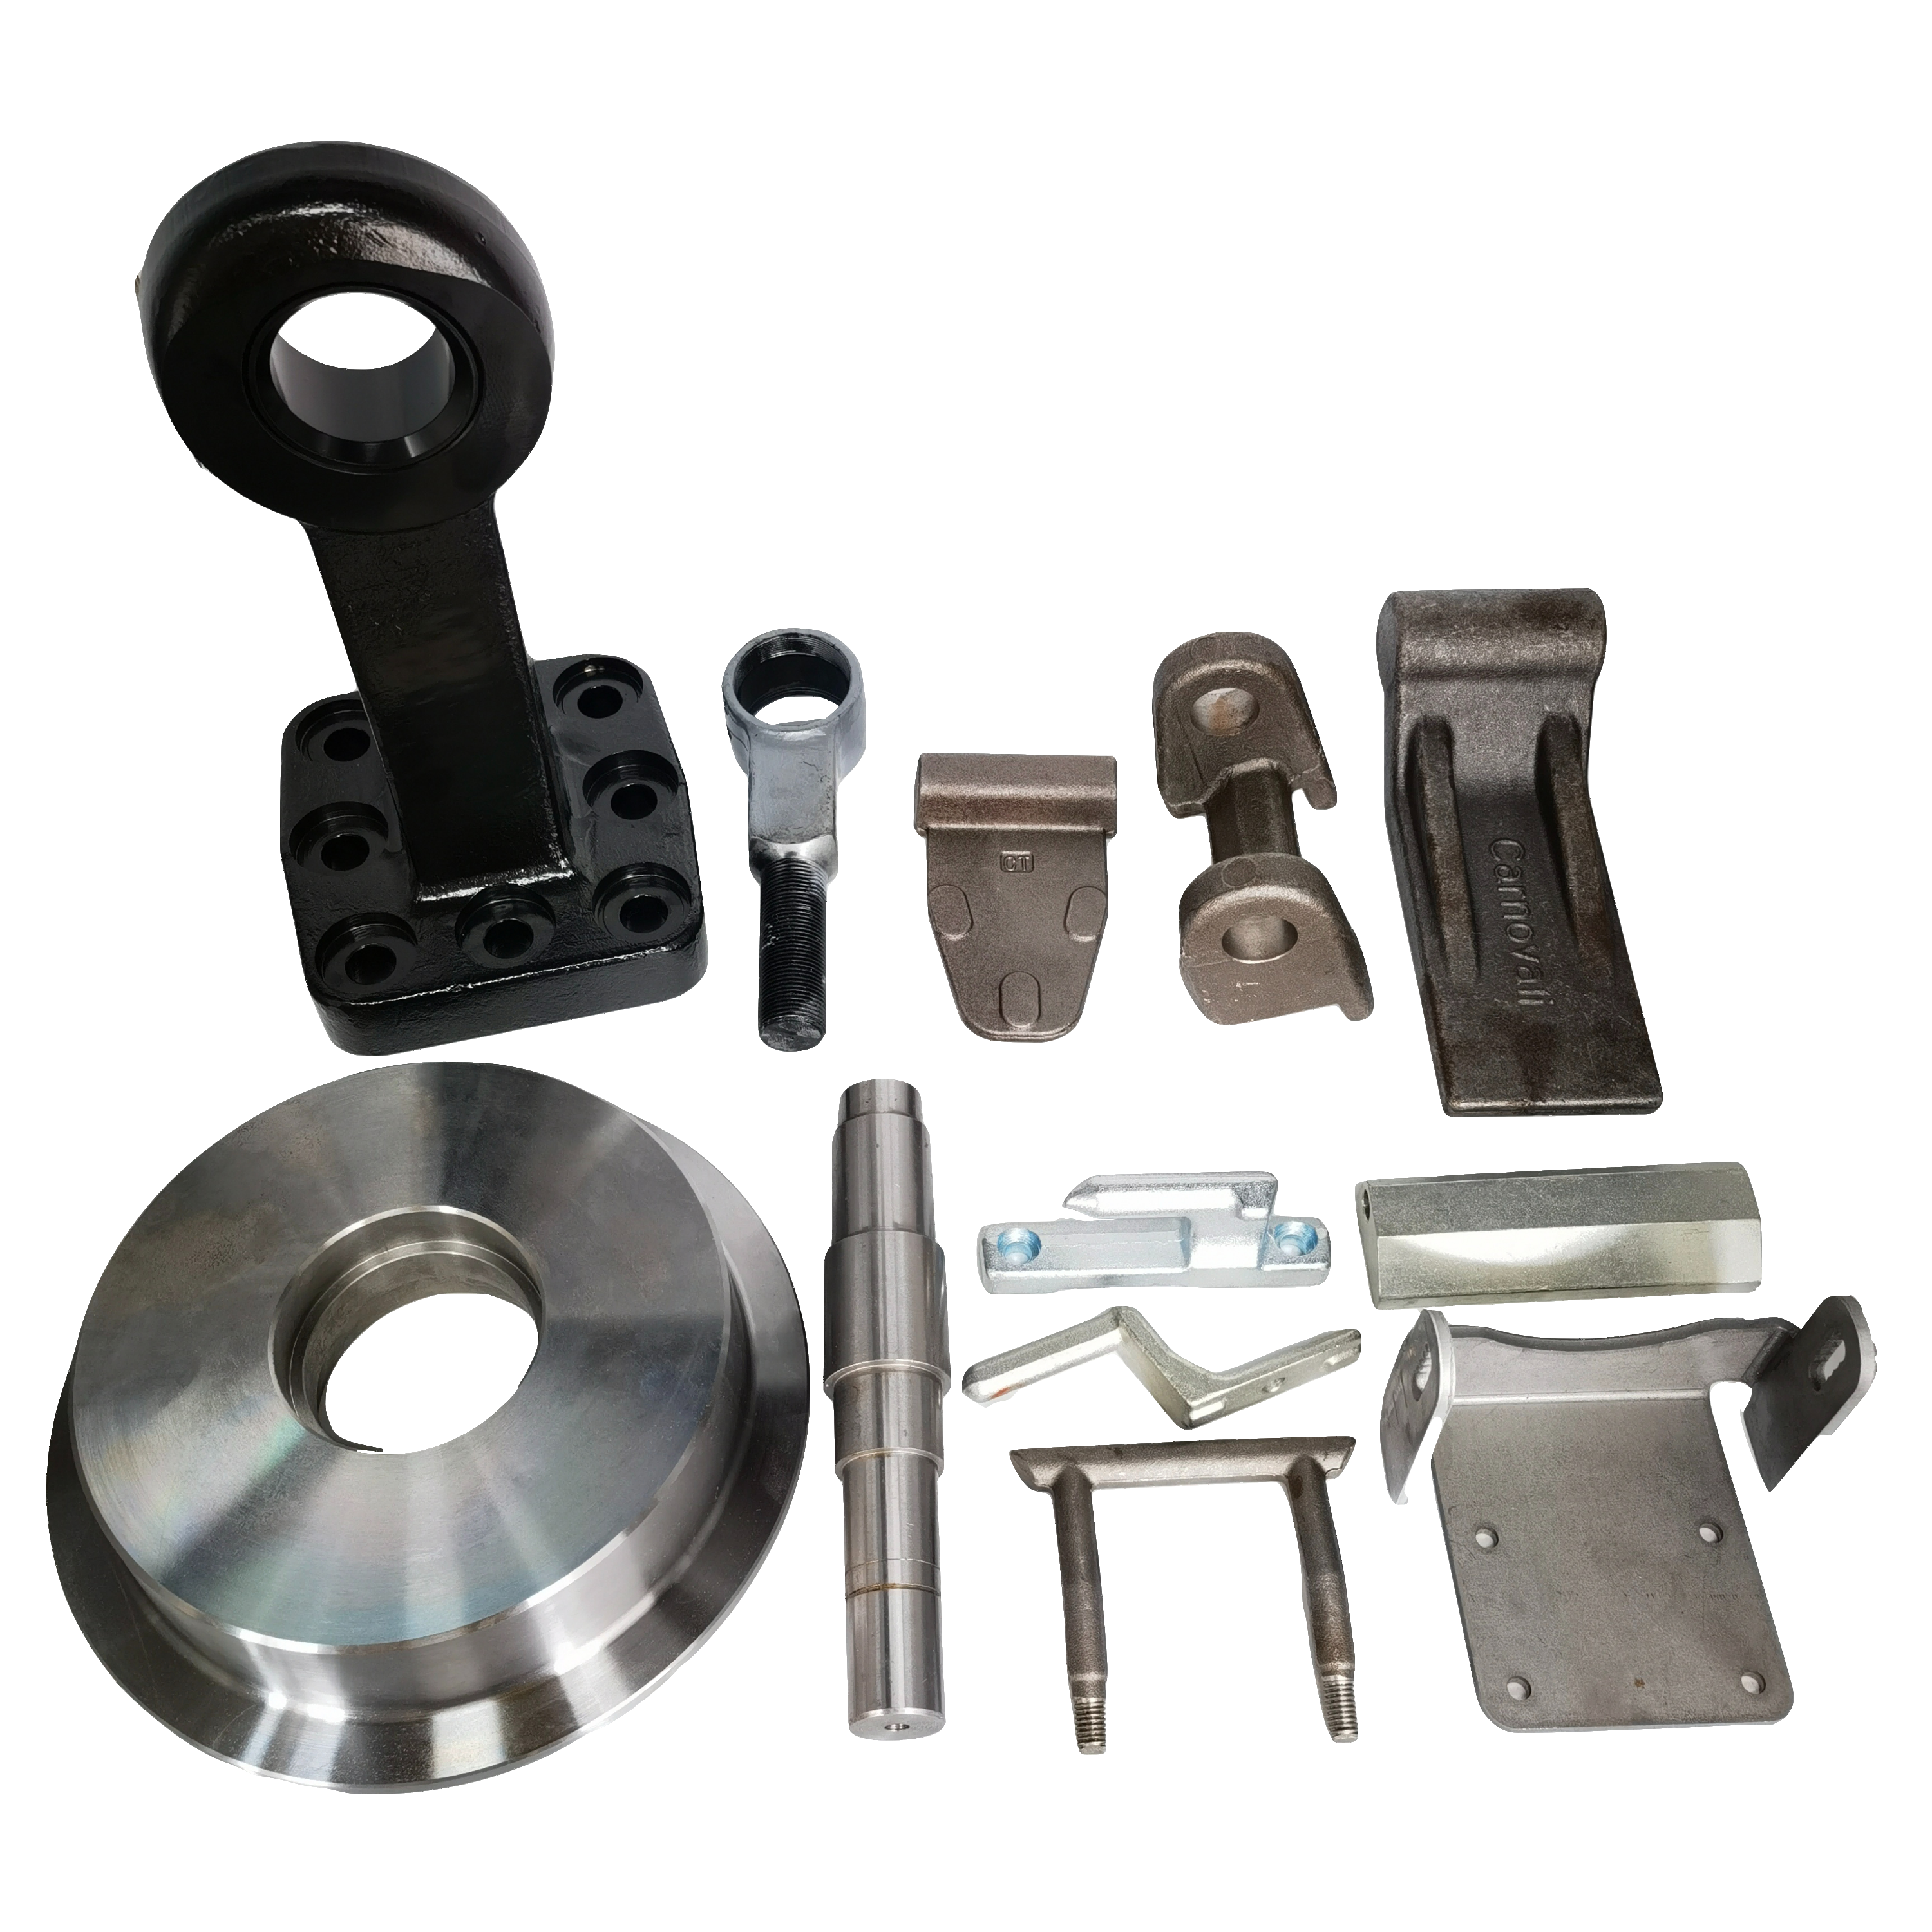 Forged lifting and rigging components